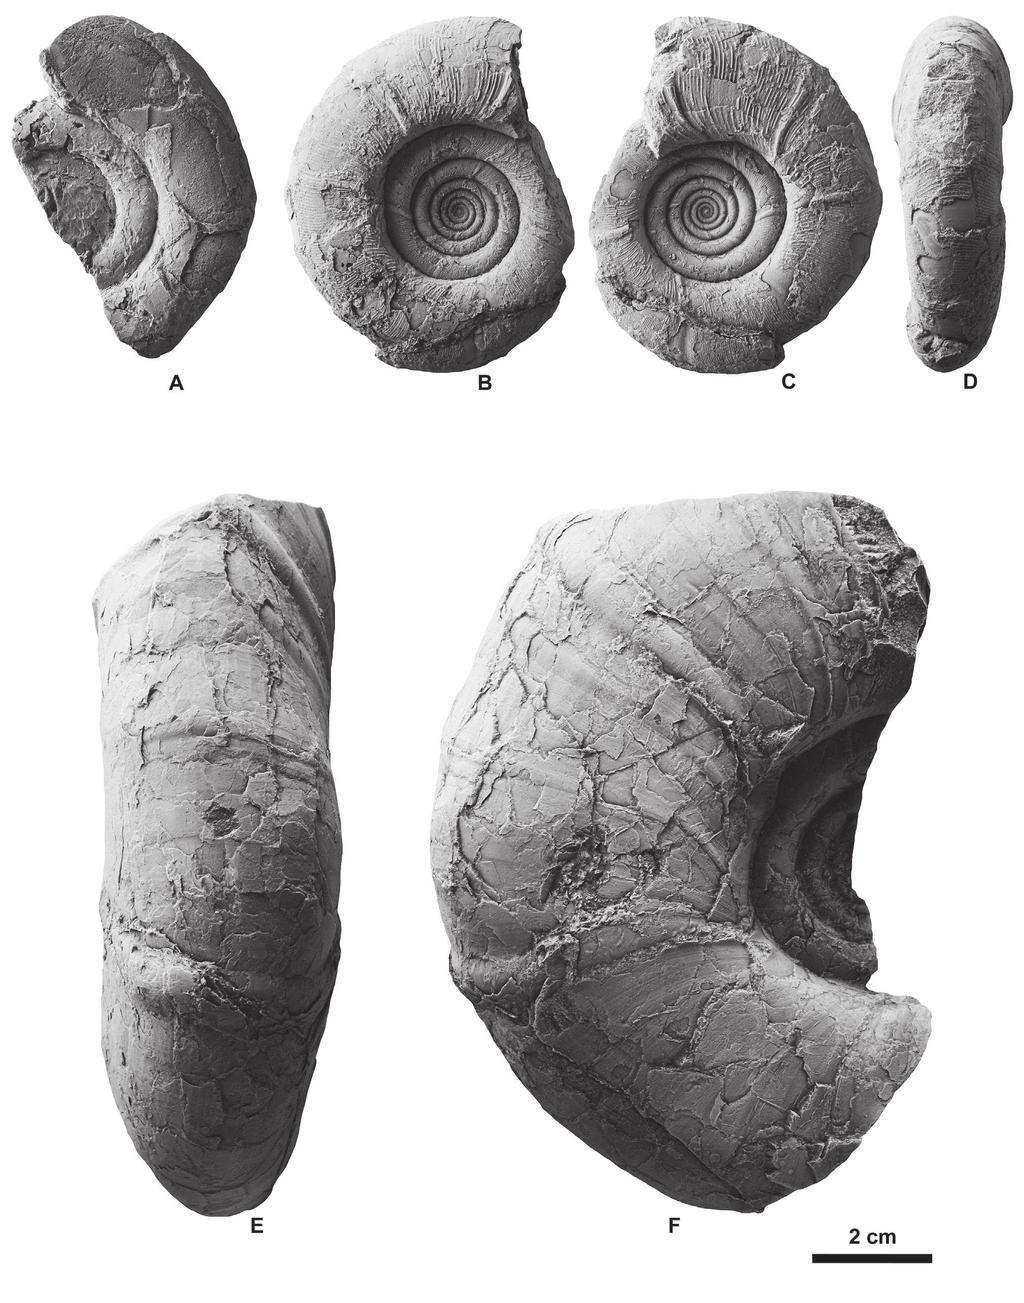 Campanian "Soya Fauna" ammonoids from Hidaka Figure 2. Saghalinites and Gaudryceras from float concretions found in a small tributary of the Pankeushappu River in the Hidaka area, Hokkaido.